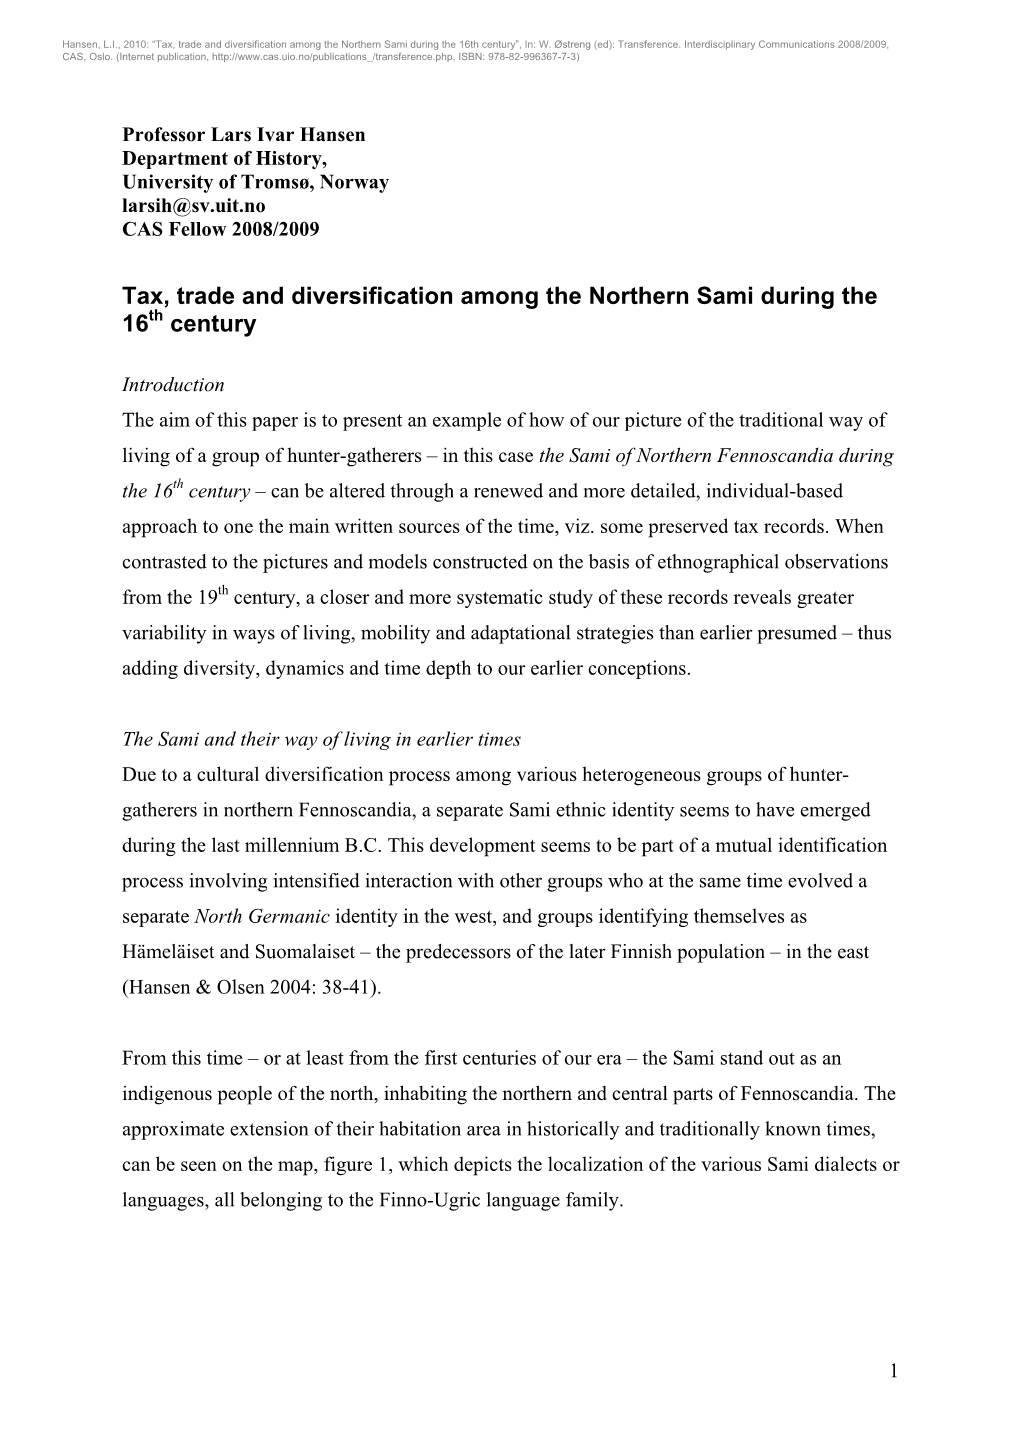 Tax, Trade and Diversification Among the Northern Sami During the 16Th Century”, In: W